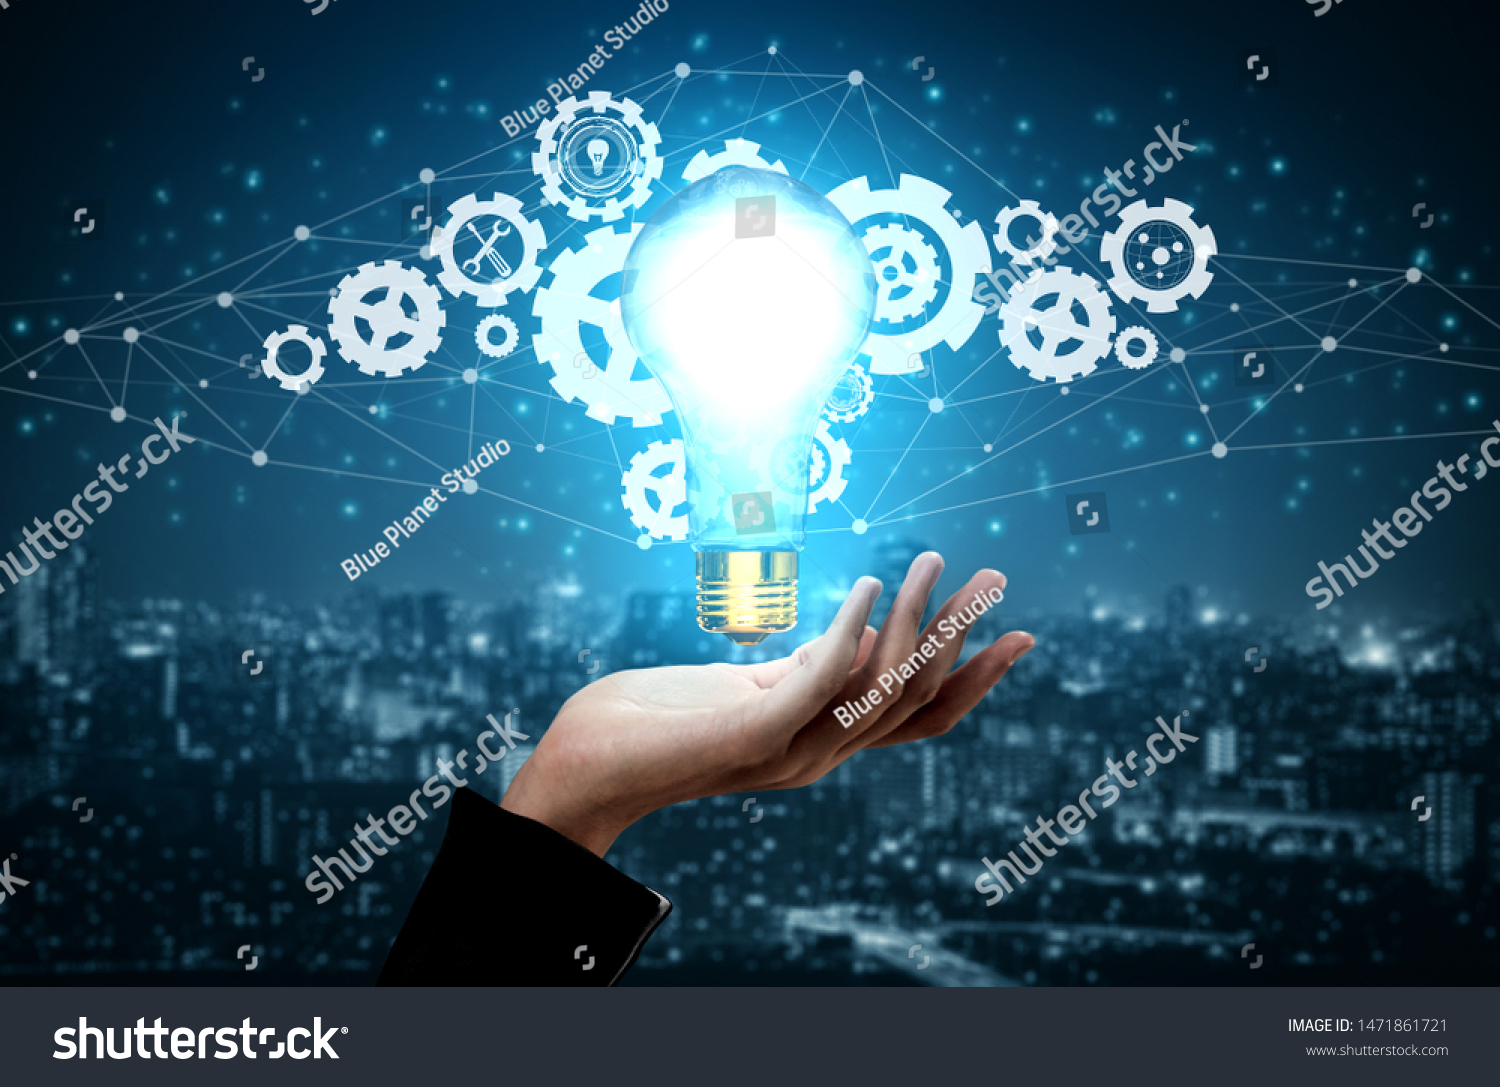 Innovation Technology for Business Finance Concept. Modern graphic interface showing symbol of innovative ideas thinking, research and development study. #1471861721